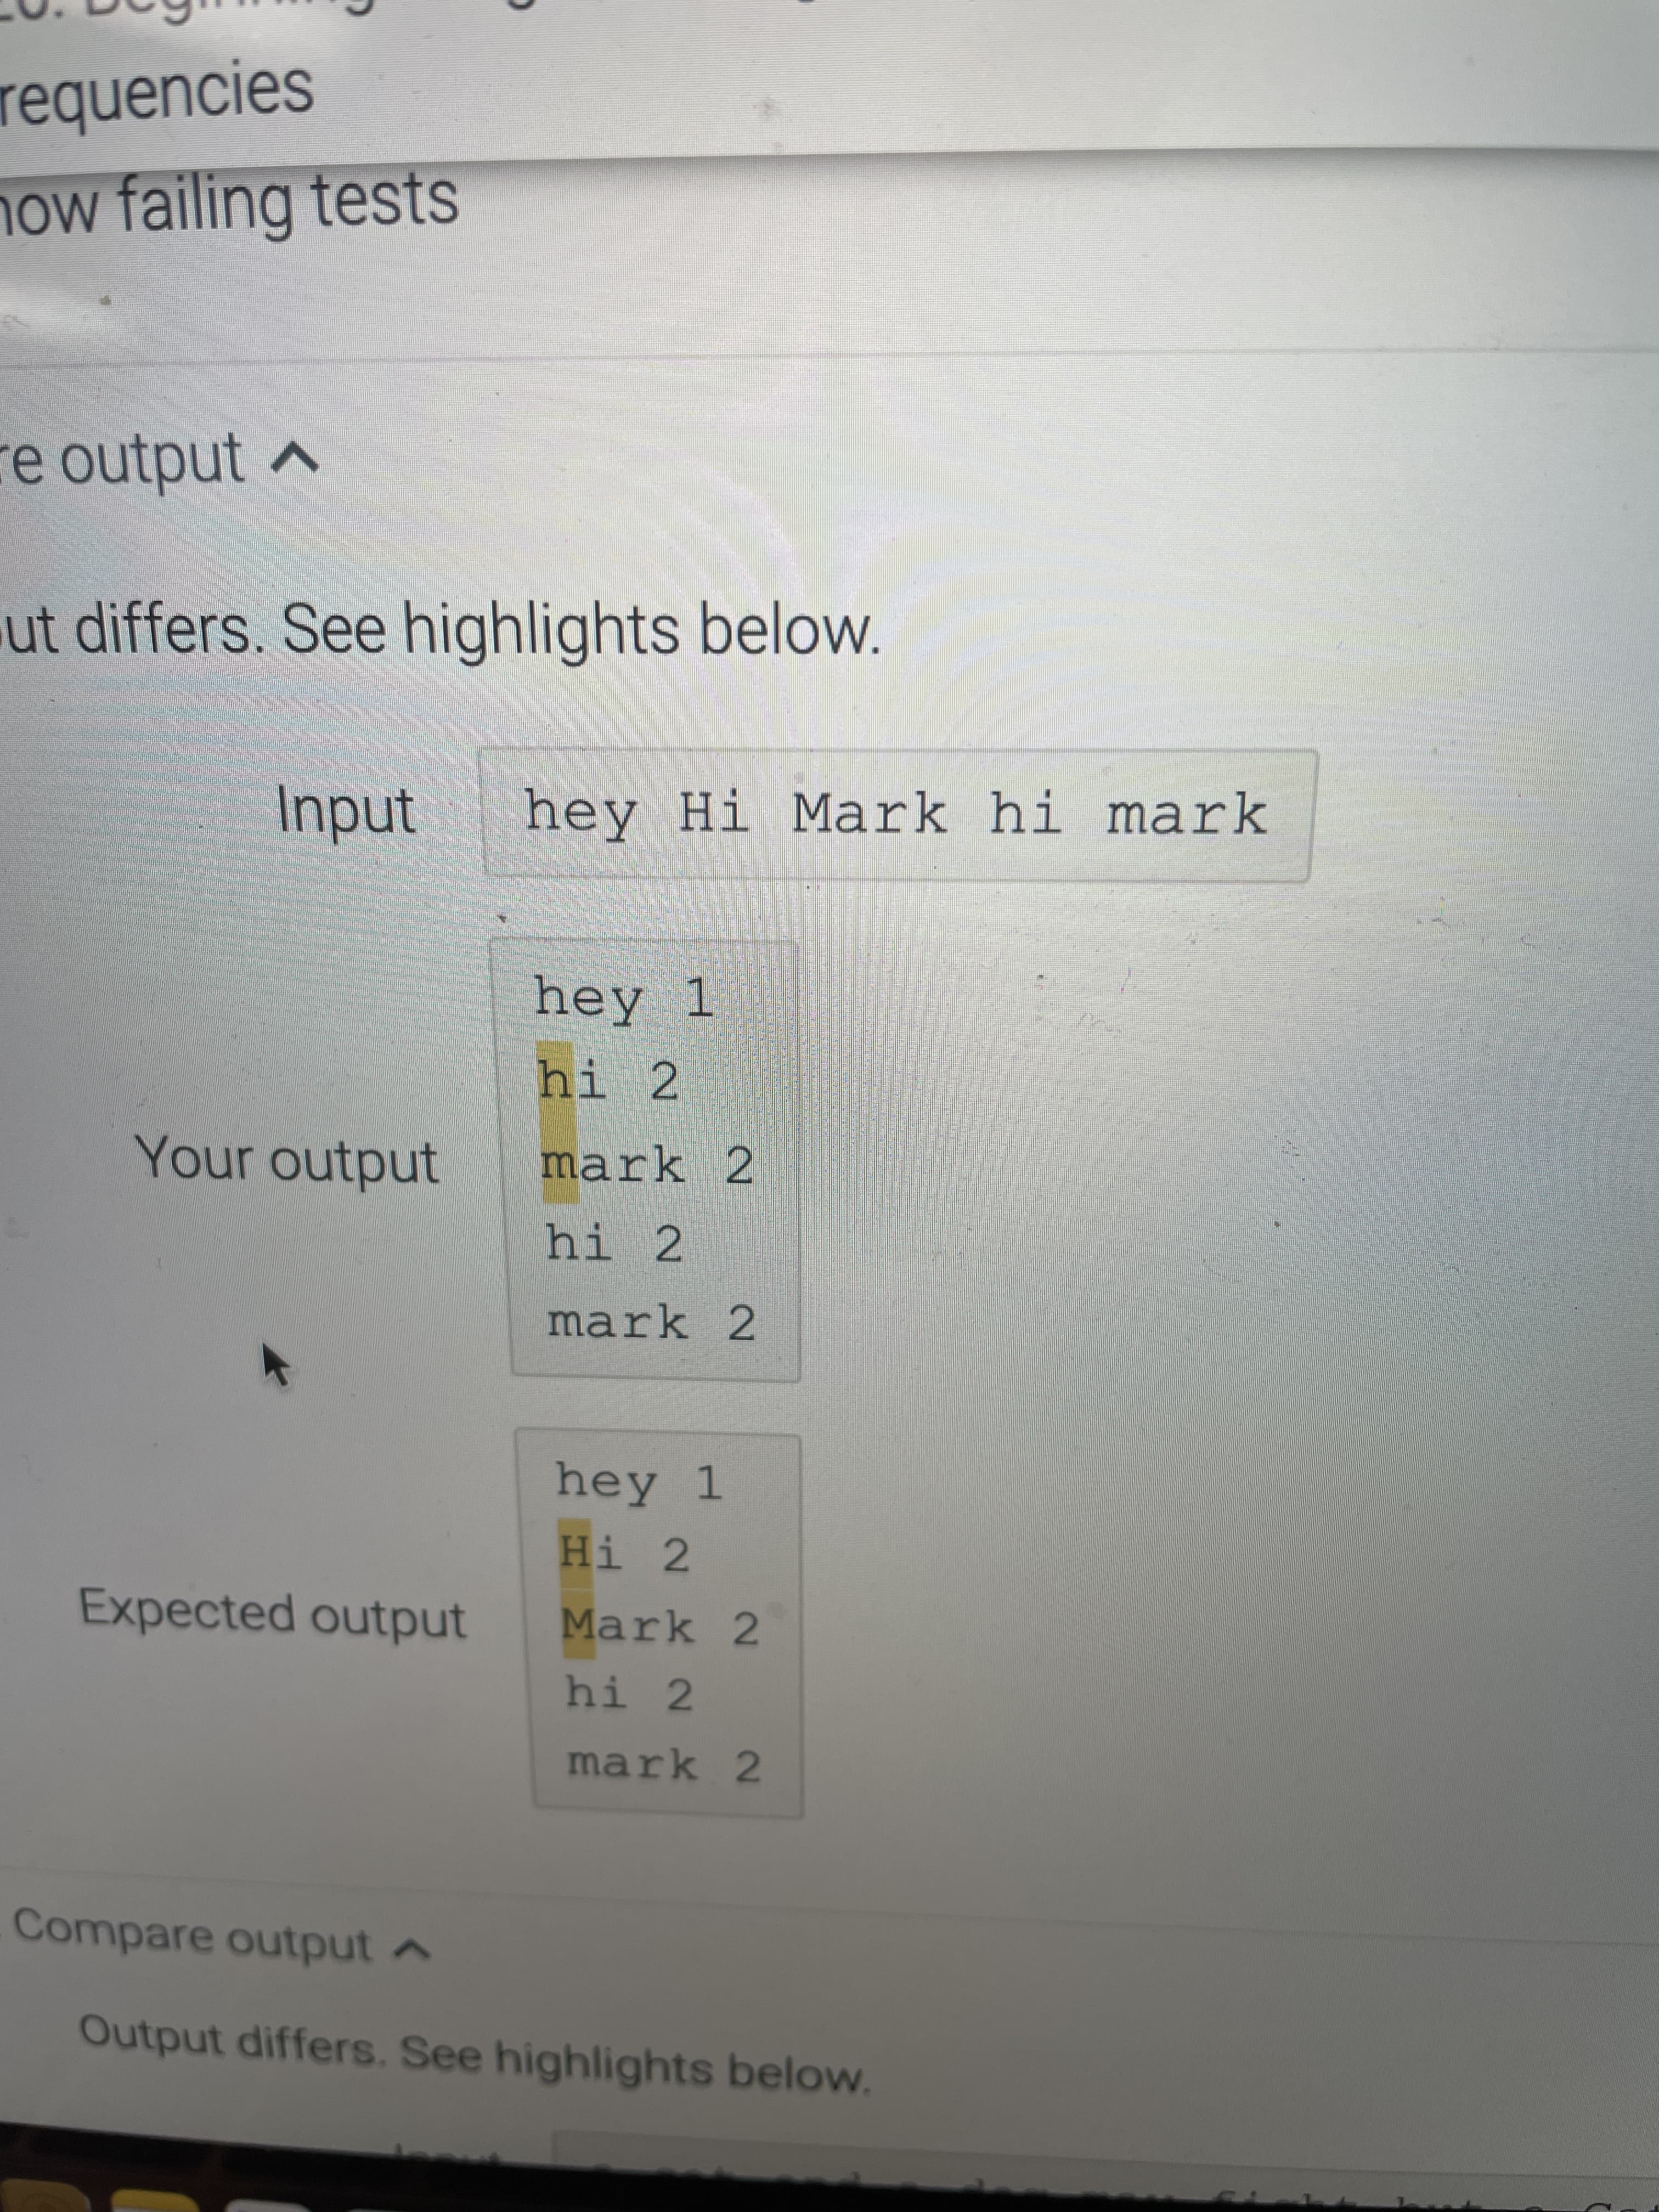 requencies
how failing tests
e output
ut differs. See highlights below.
hey Hi Mark hi mark
hey 1
hi 2
Your output
mark 2
hi 2
mark 2
hey 1
Hi 2
Expected output
Mark 2
hi 2
mark 2
Compare output A
Output differs. See highlights below.
